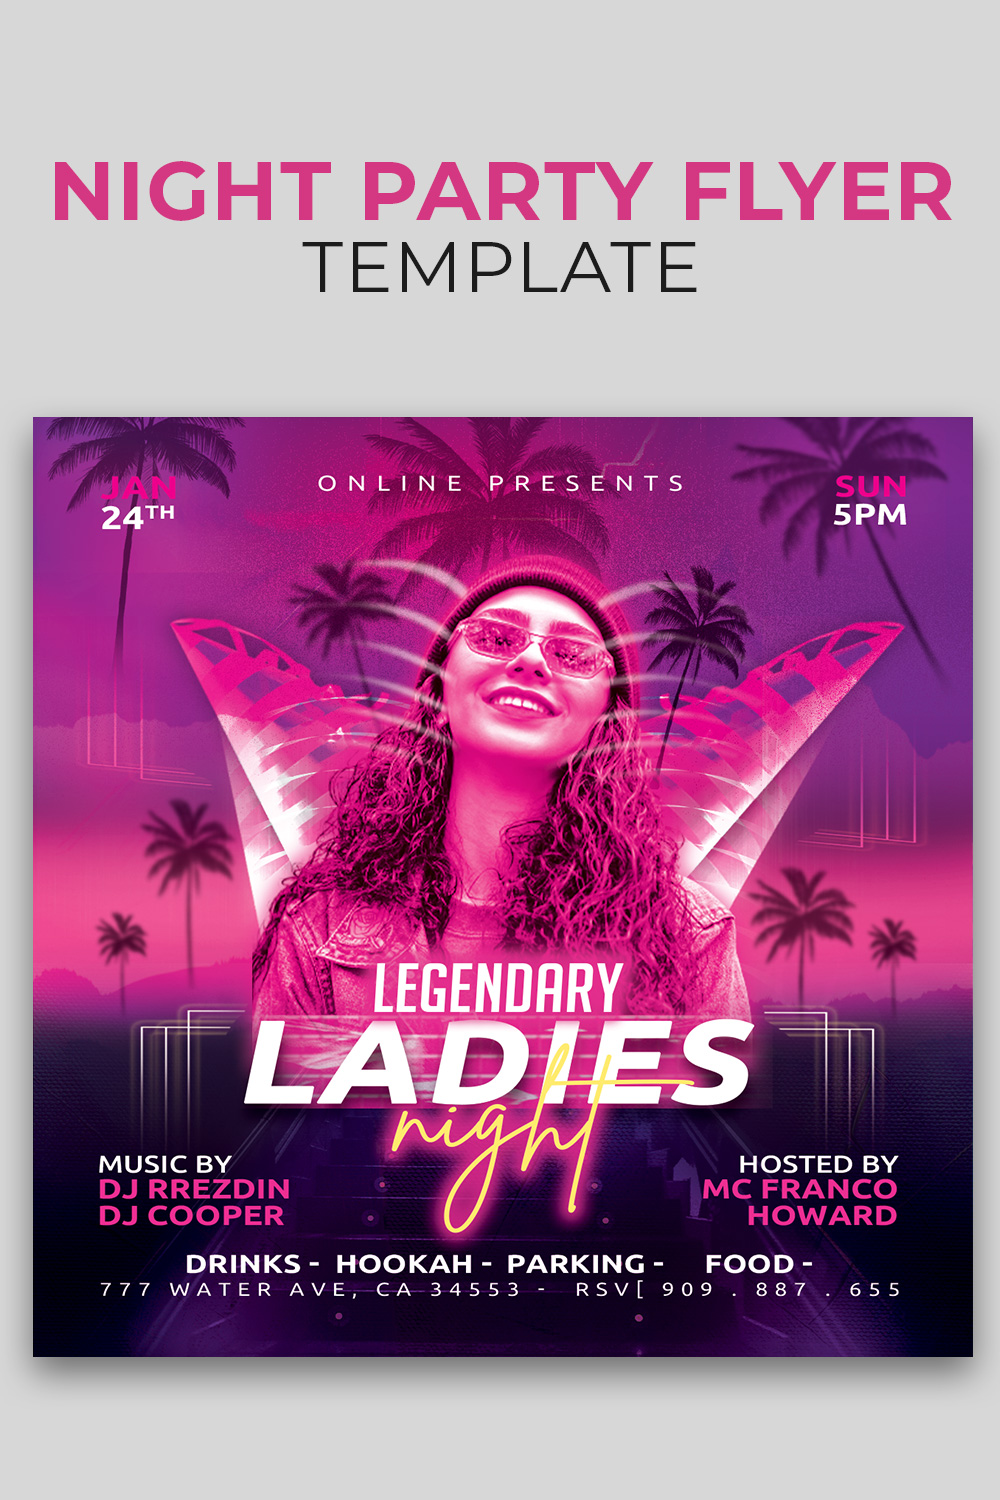 Ladis night Party Flyer Template / Instagram Banner psd pinterest preview image.